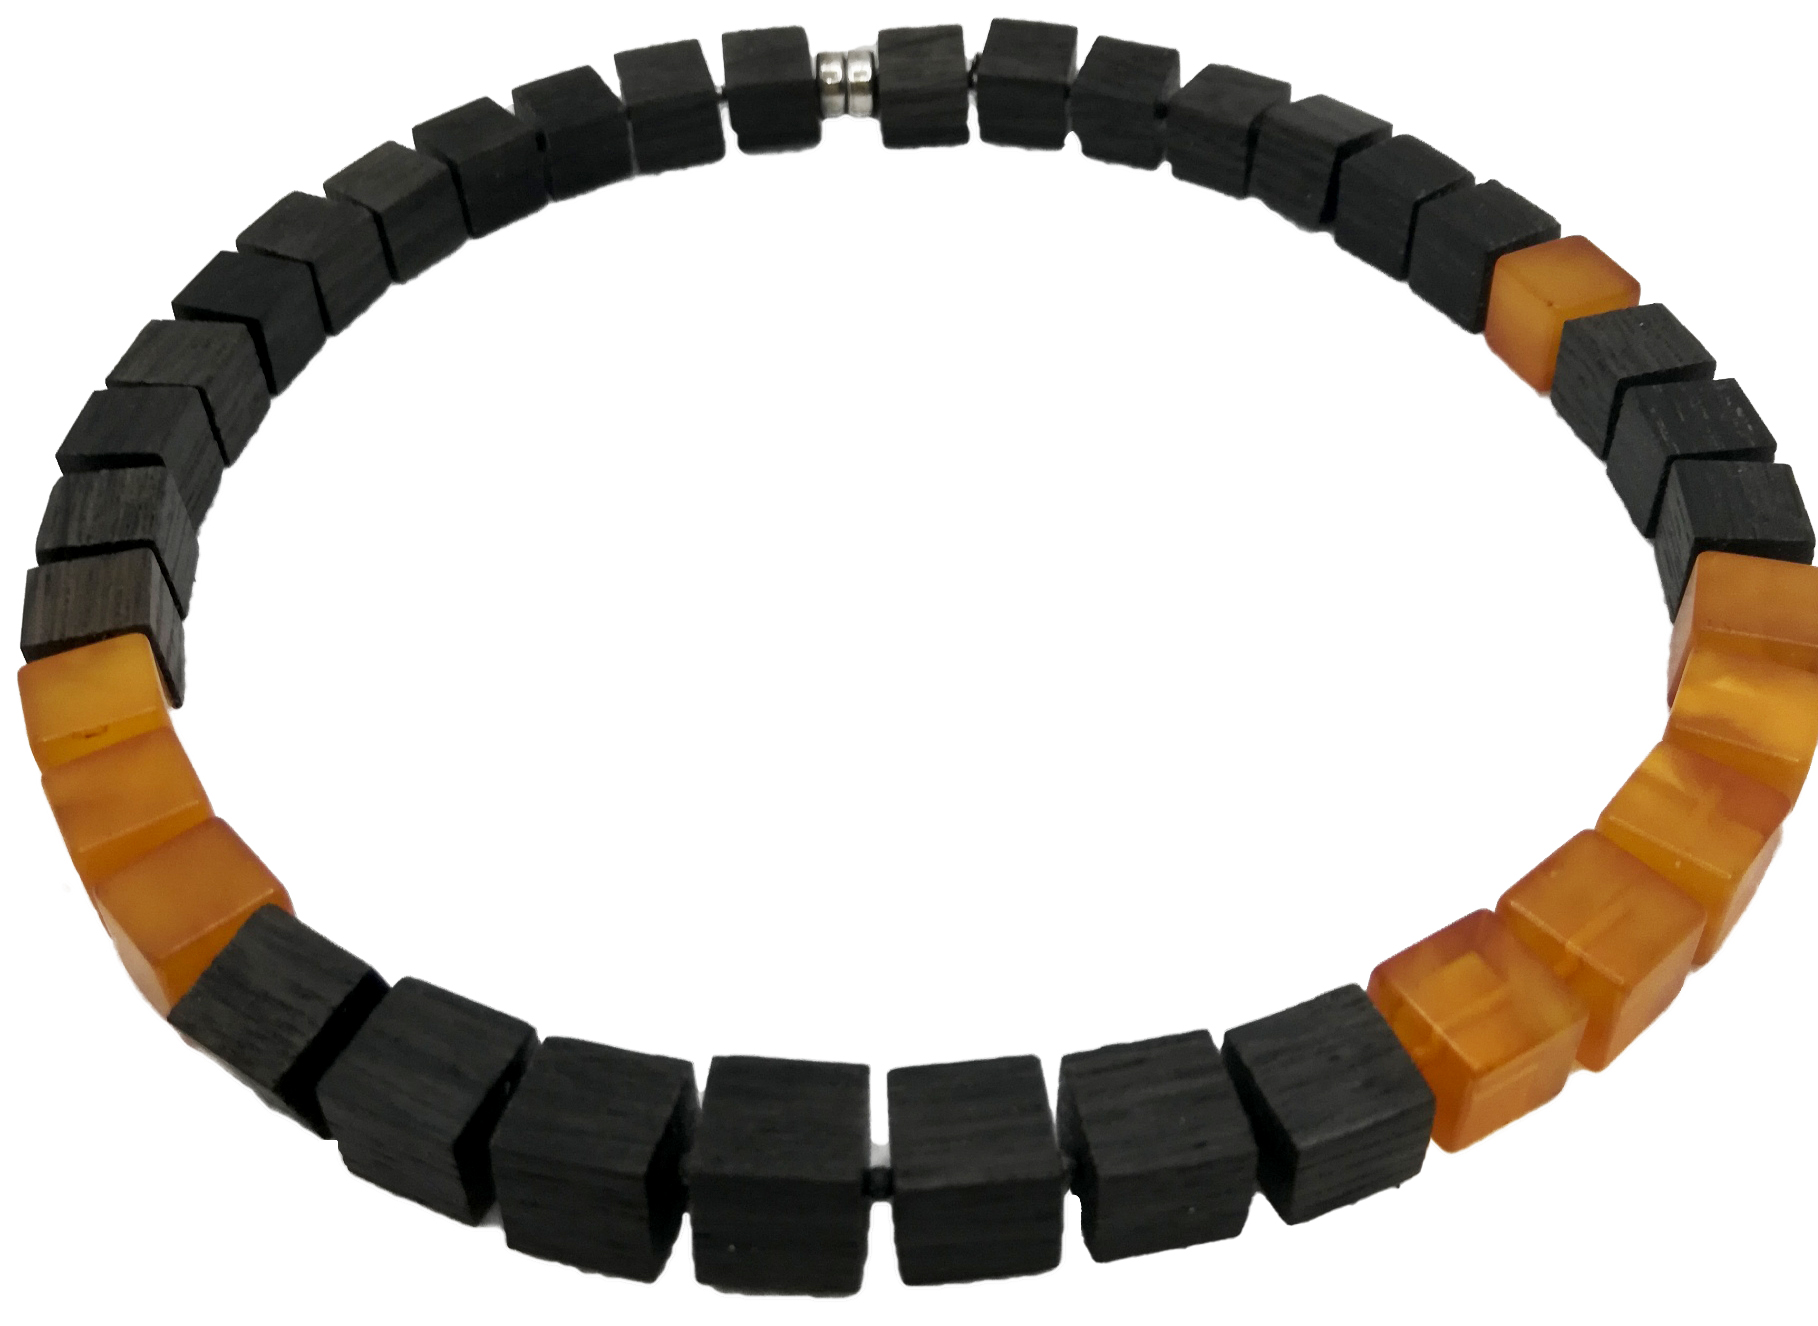 Genuine honey Baltic amber and fossilized oak cubes necklace